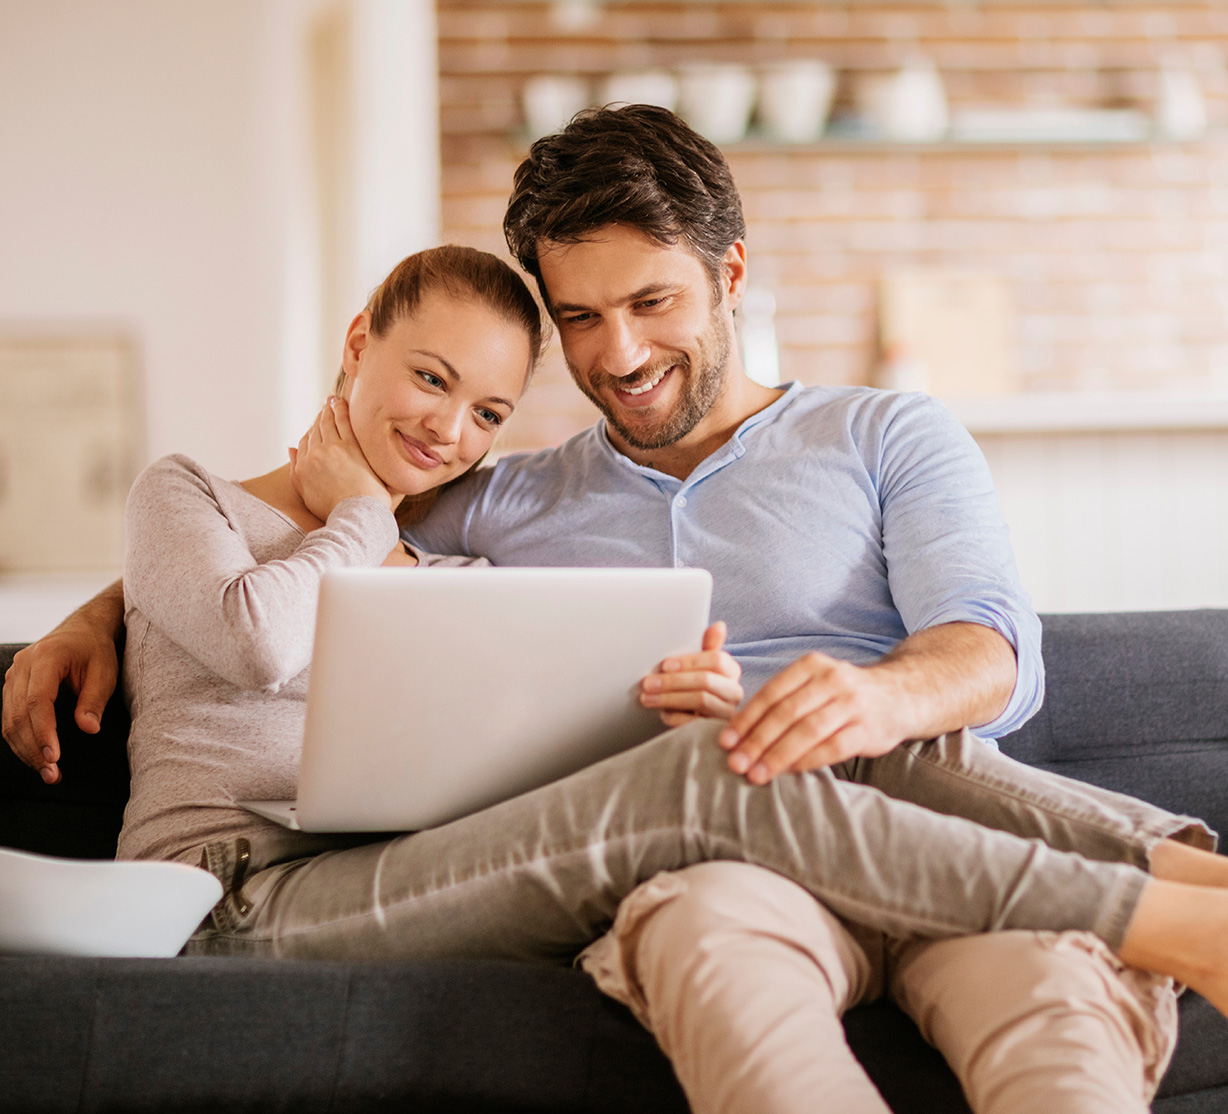 A man and a woman sit on the couch looking at a laptop together.